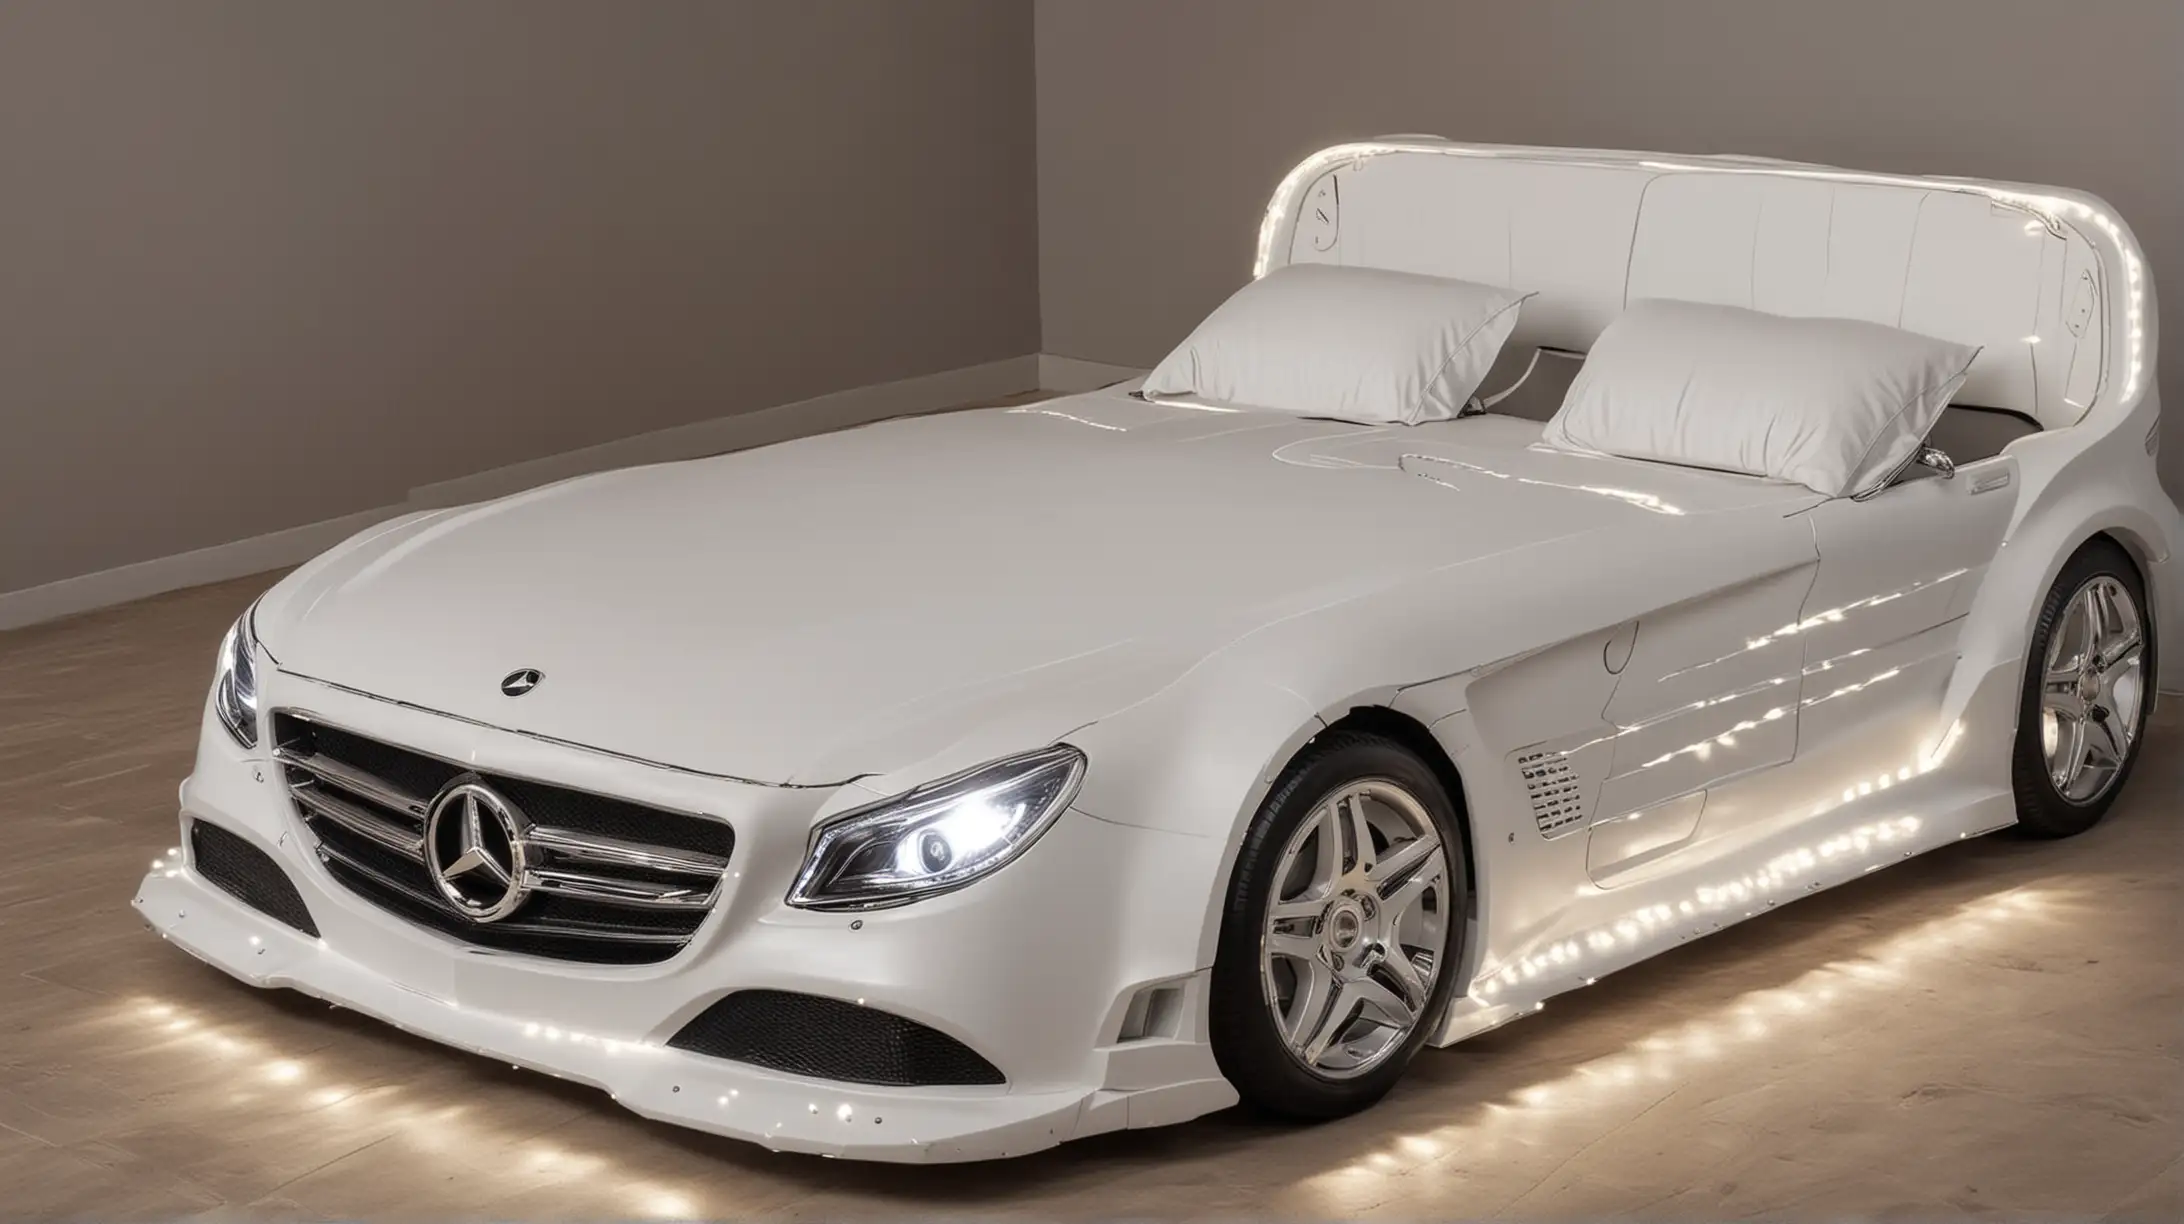 Double bed in the shape of a Mercedes car with headlights on